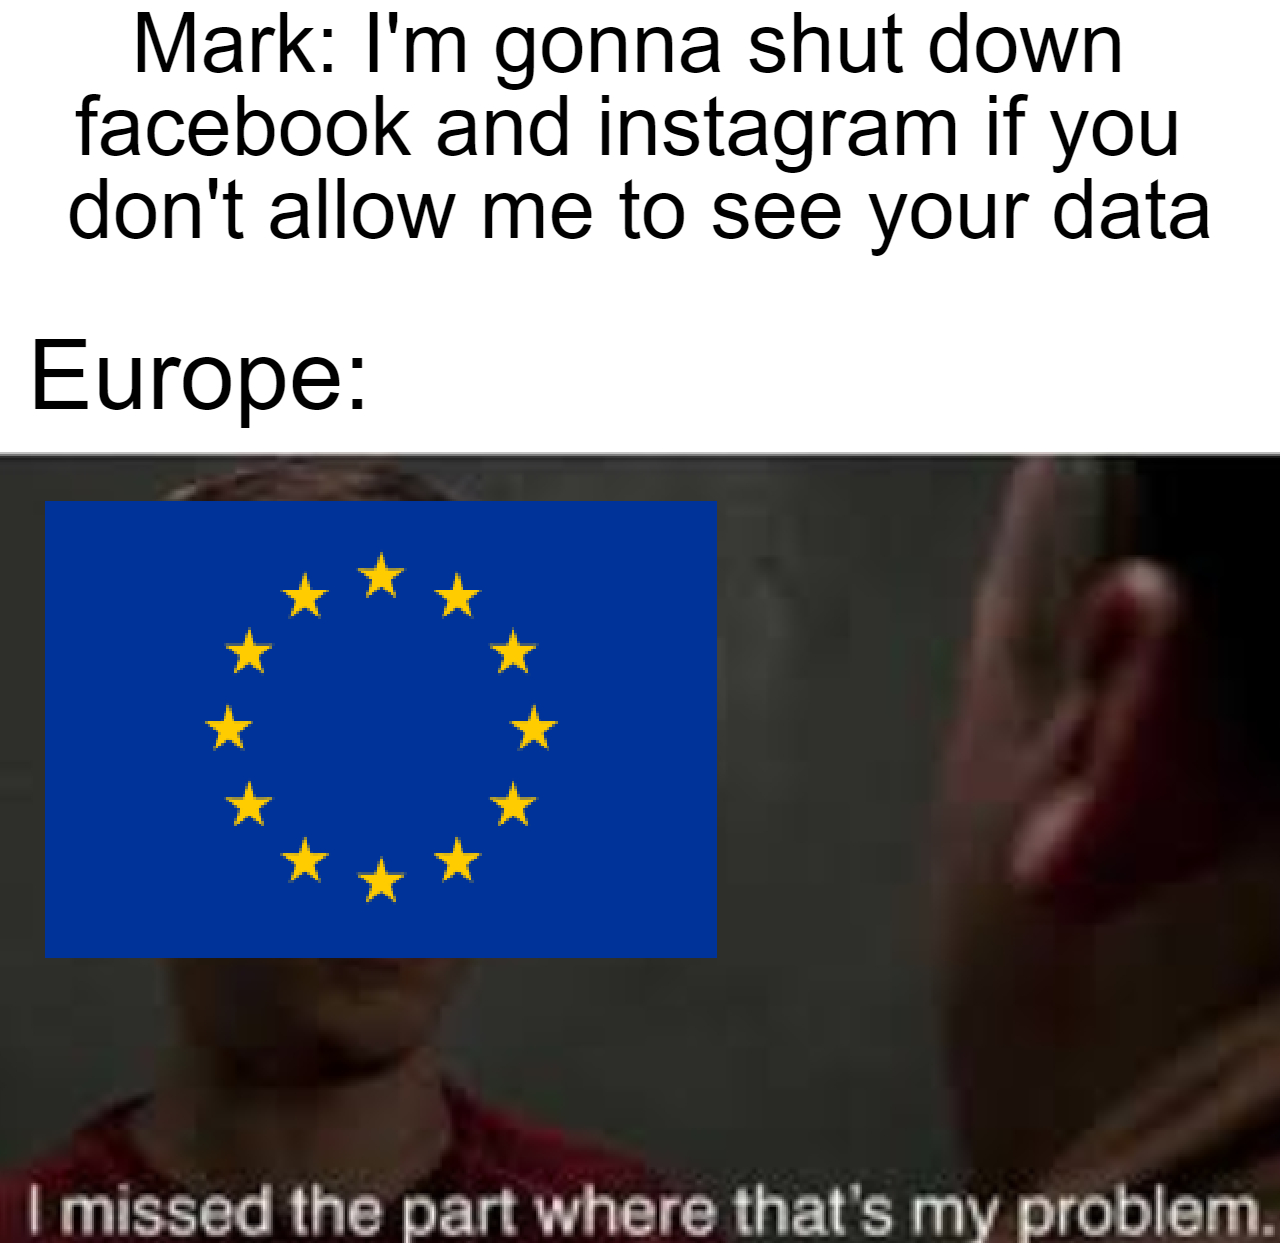 funny - Mark I'm gonna shut down facebook and instagram if you don't allow me to see your data Europe I missed the part where that's my problem.